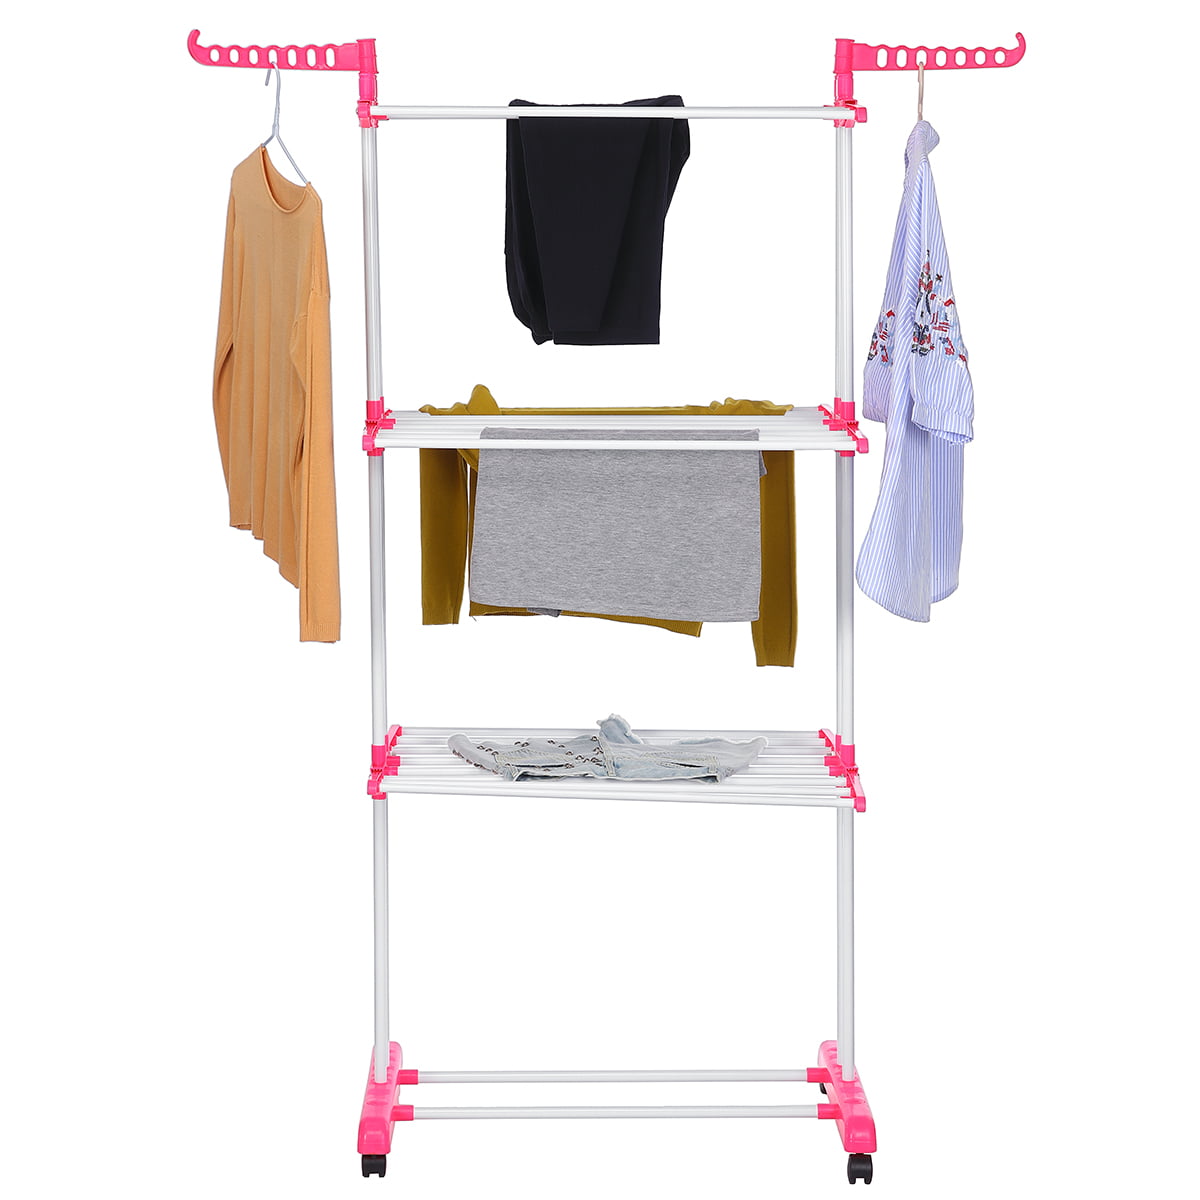 Portable Heated 2 Tier Clothes Airer Folding Indoor Laundry Washing Dryer Horse 